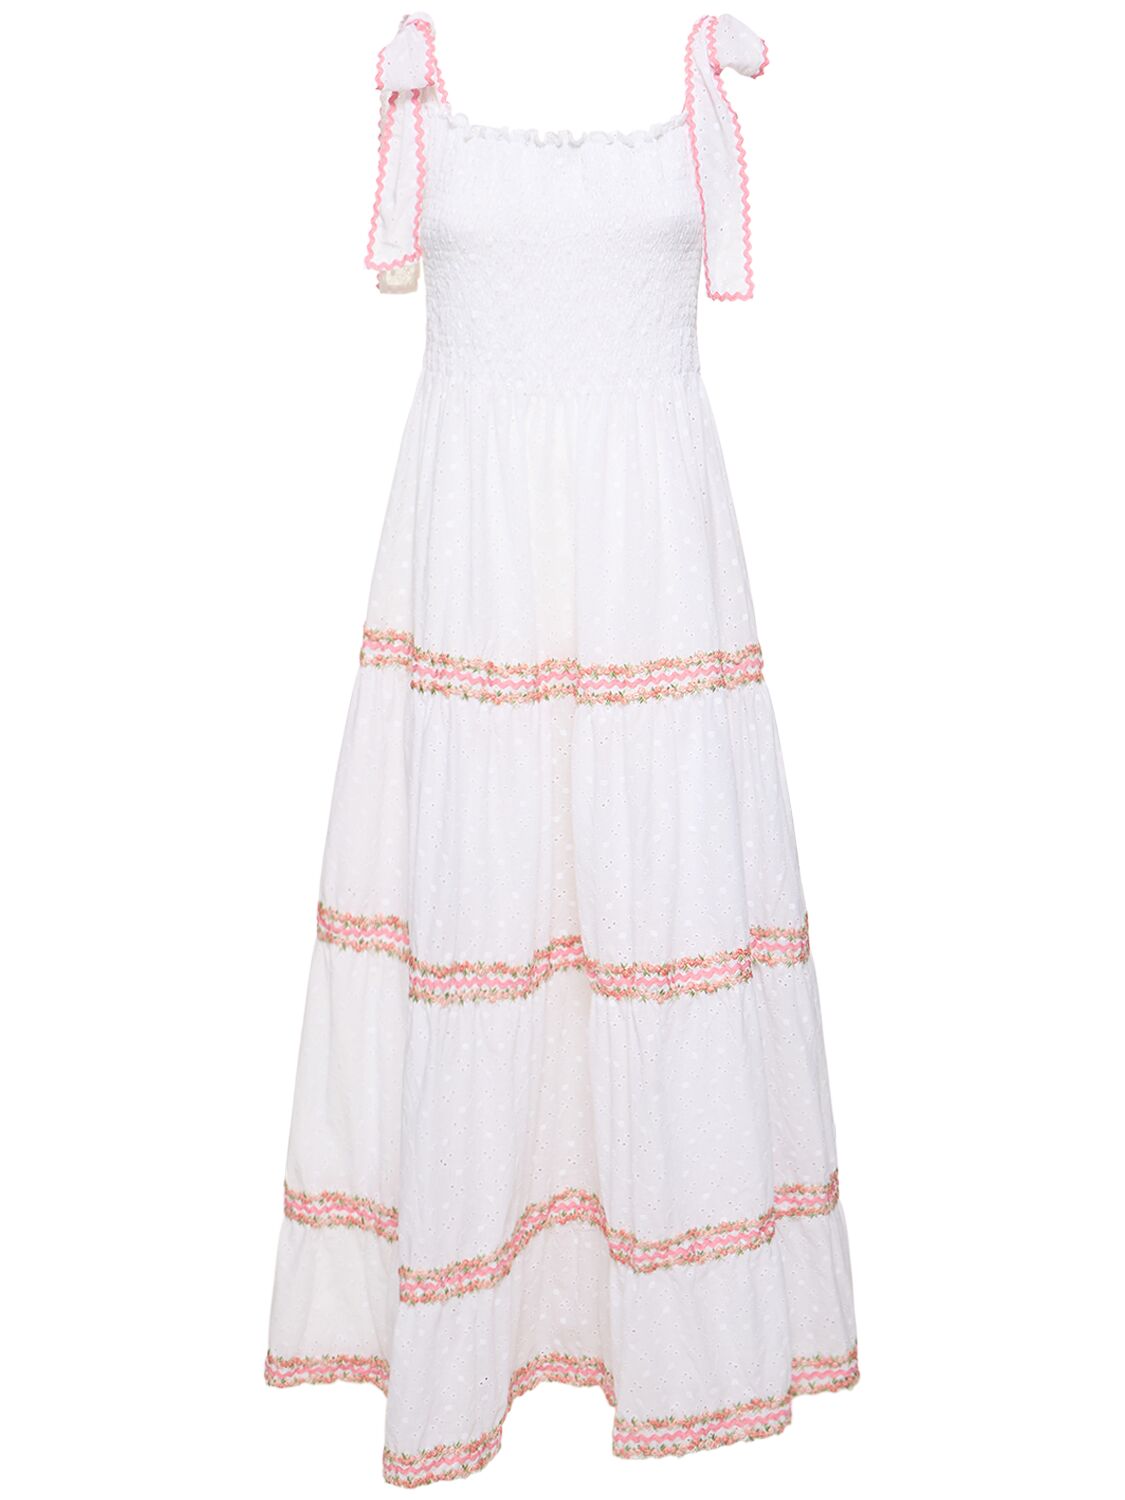 Image of Embroidery Cotton Lace-up Dress